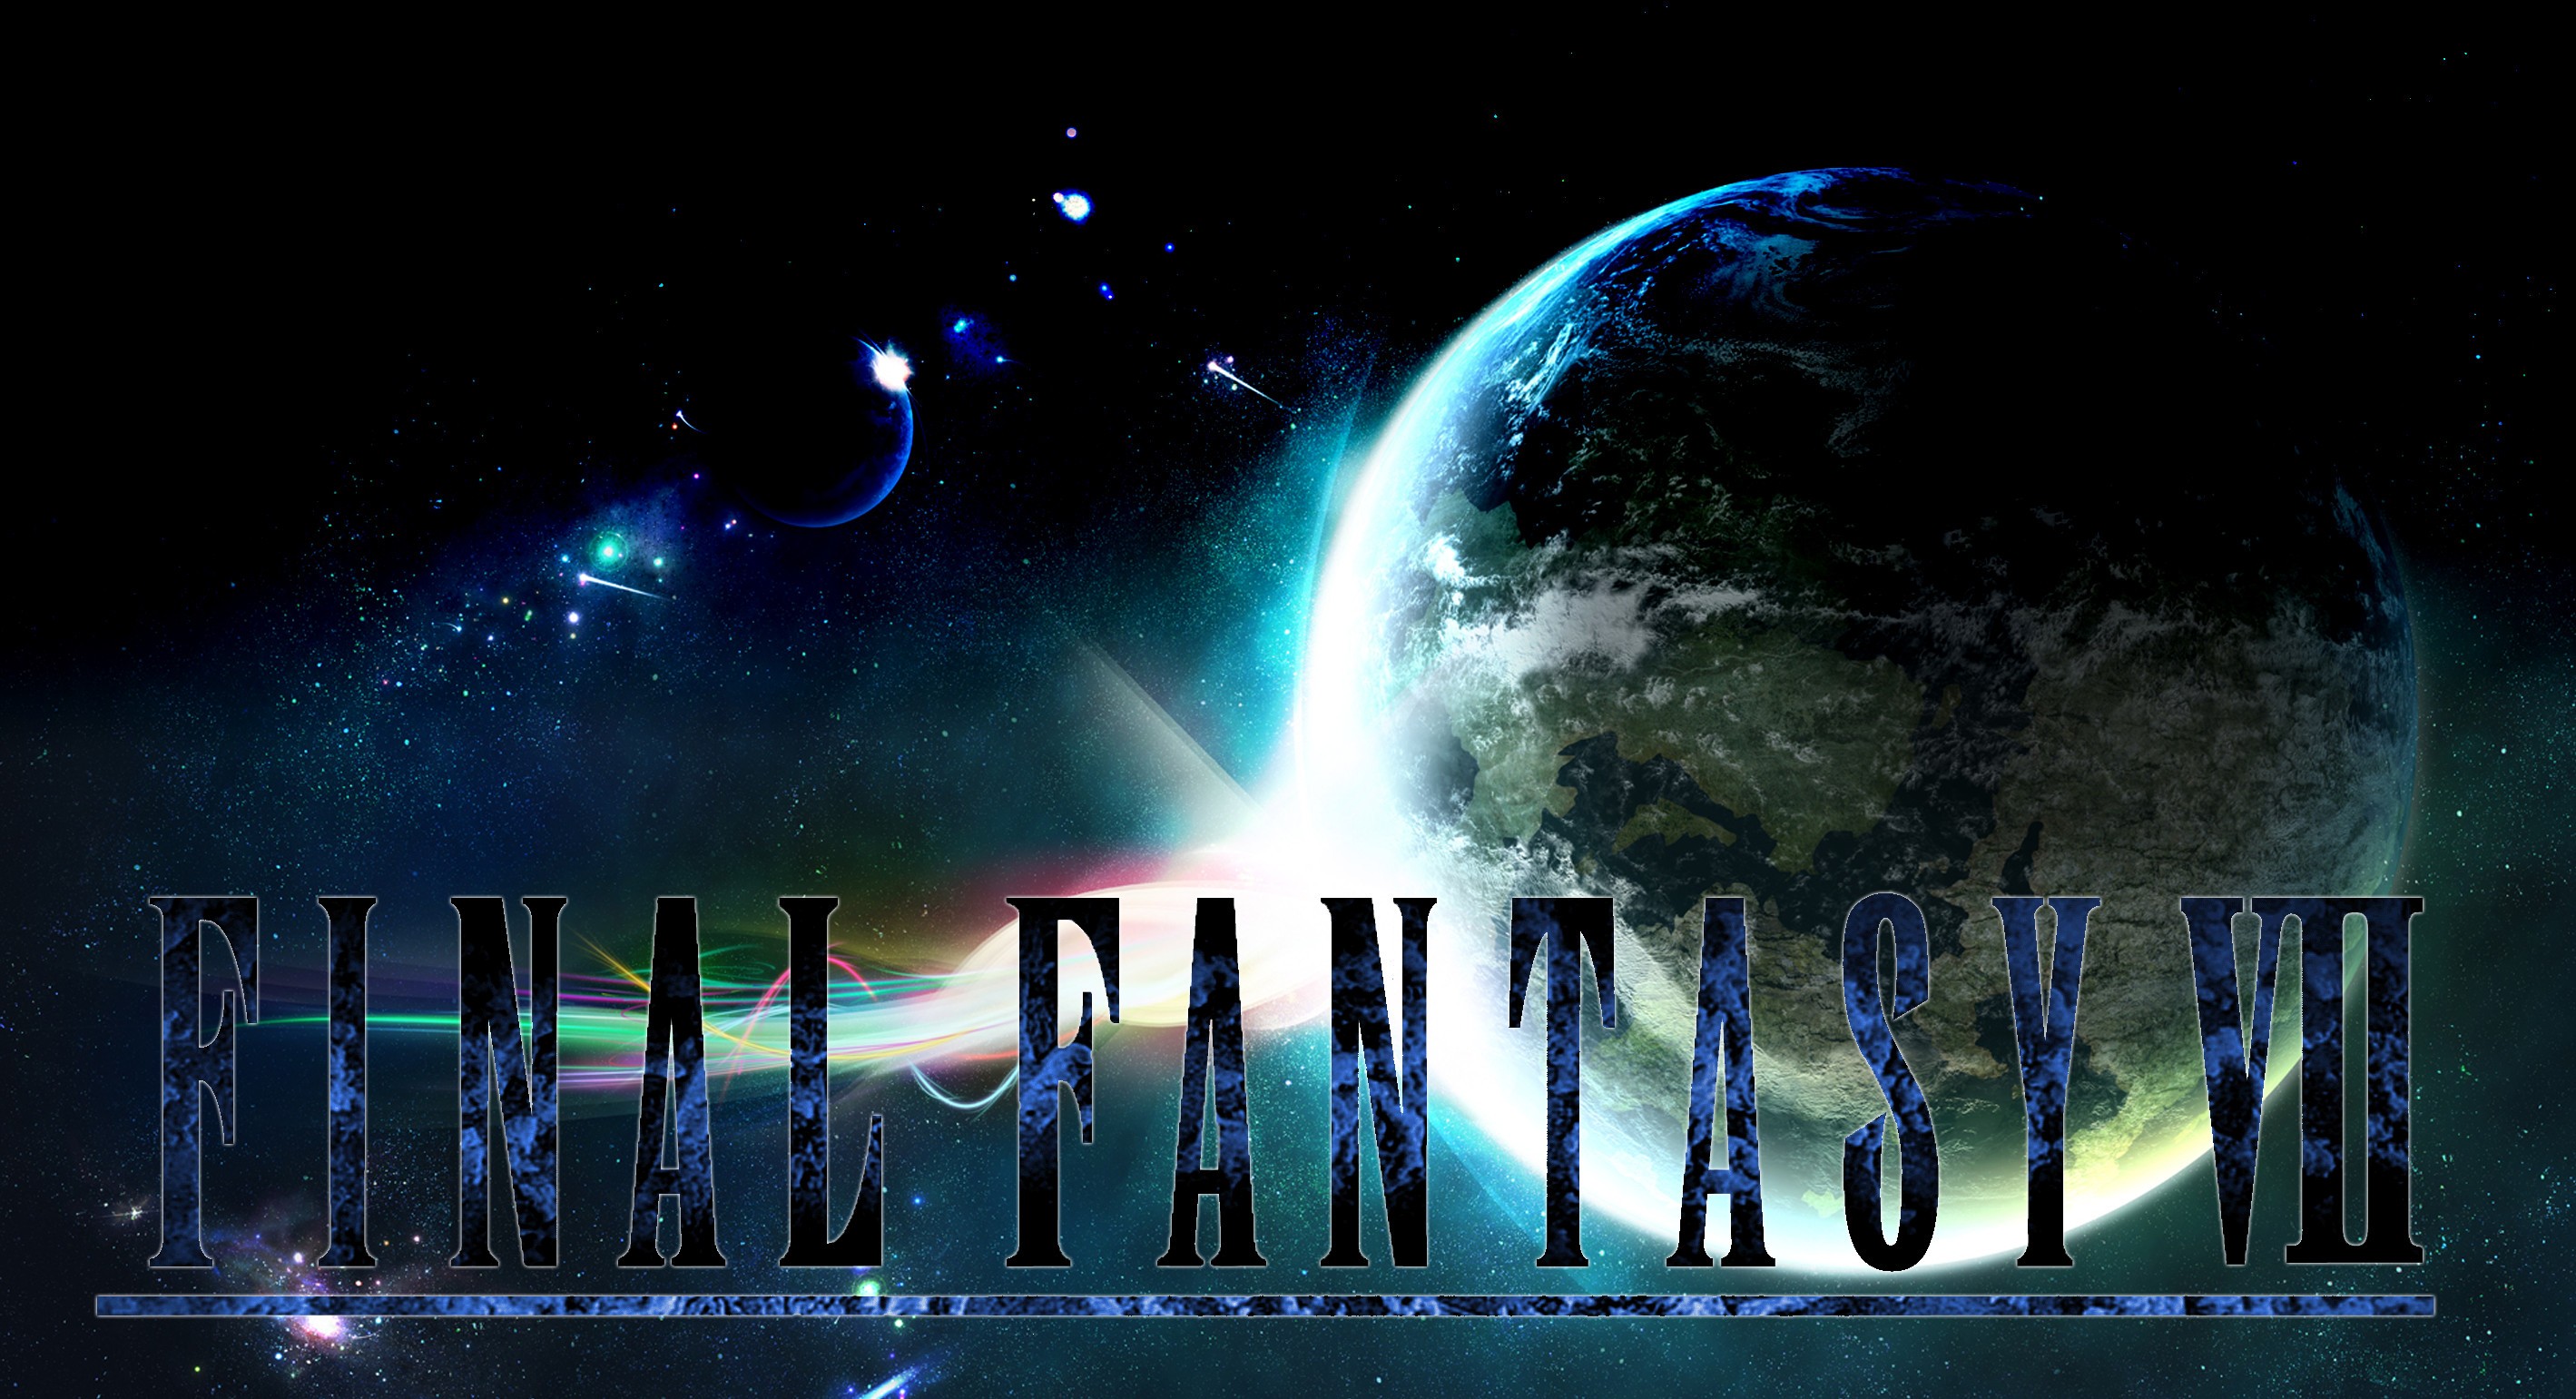 Final Fantasy Vii Wallpaper Download Free Awesome Full Hd Backgrounds For Desktop And Mobile